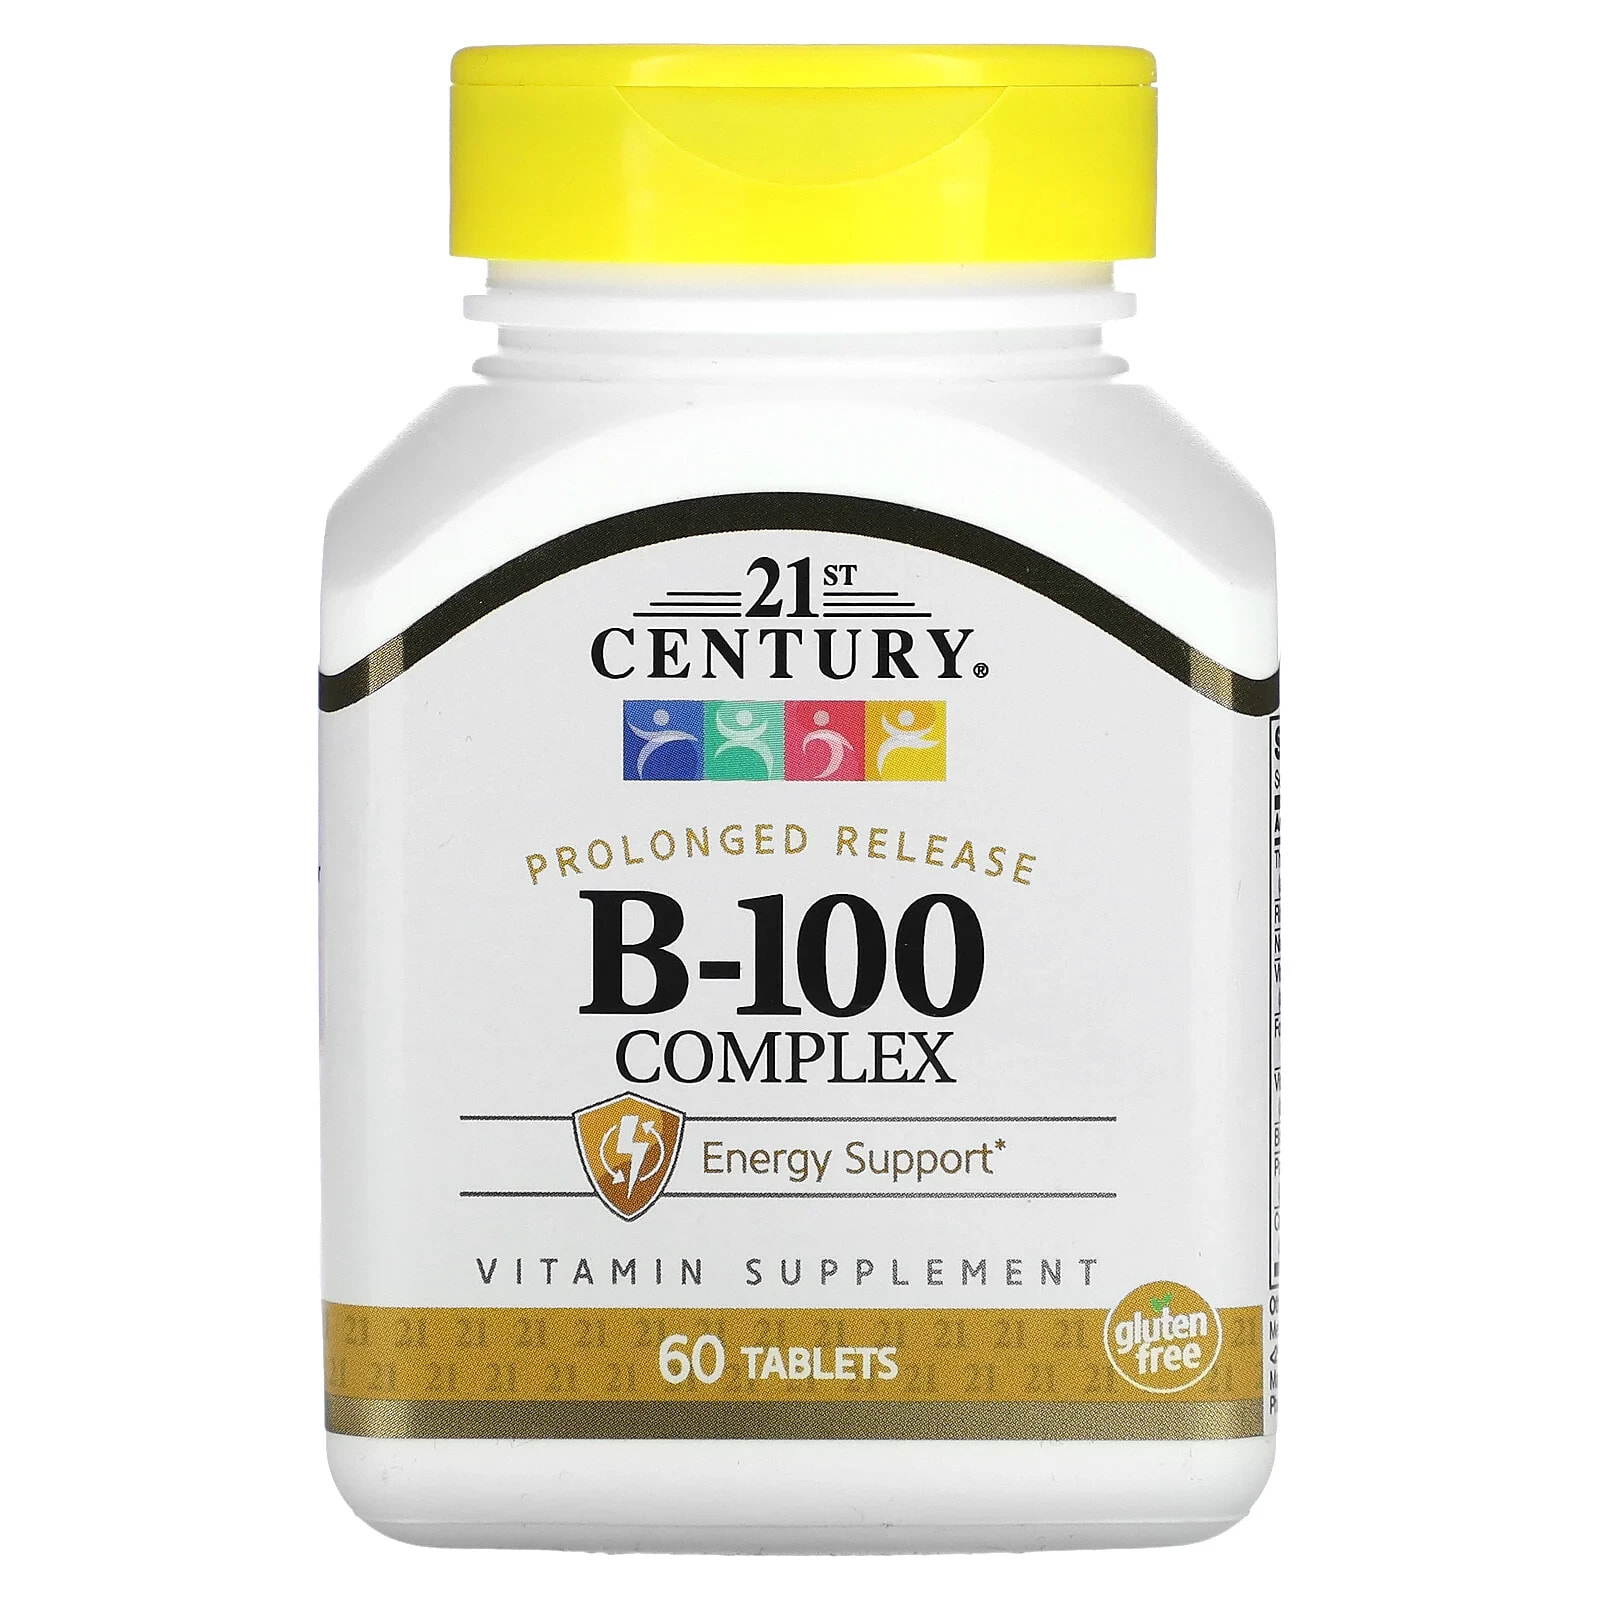 B-100 Complex, Prolonged Release, 60 Tablets